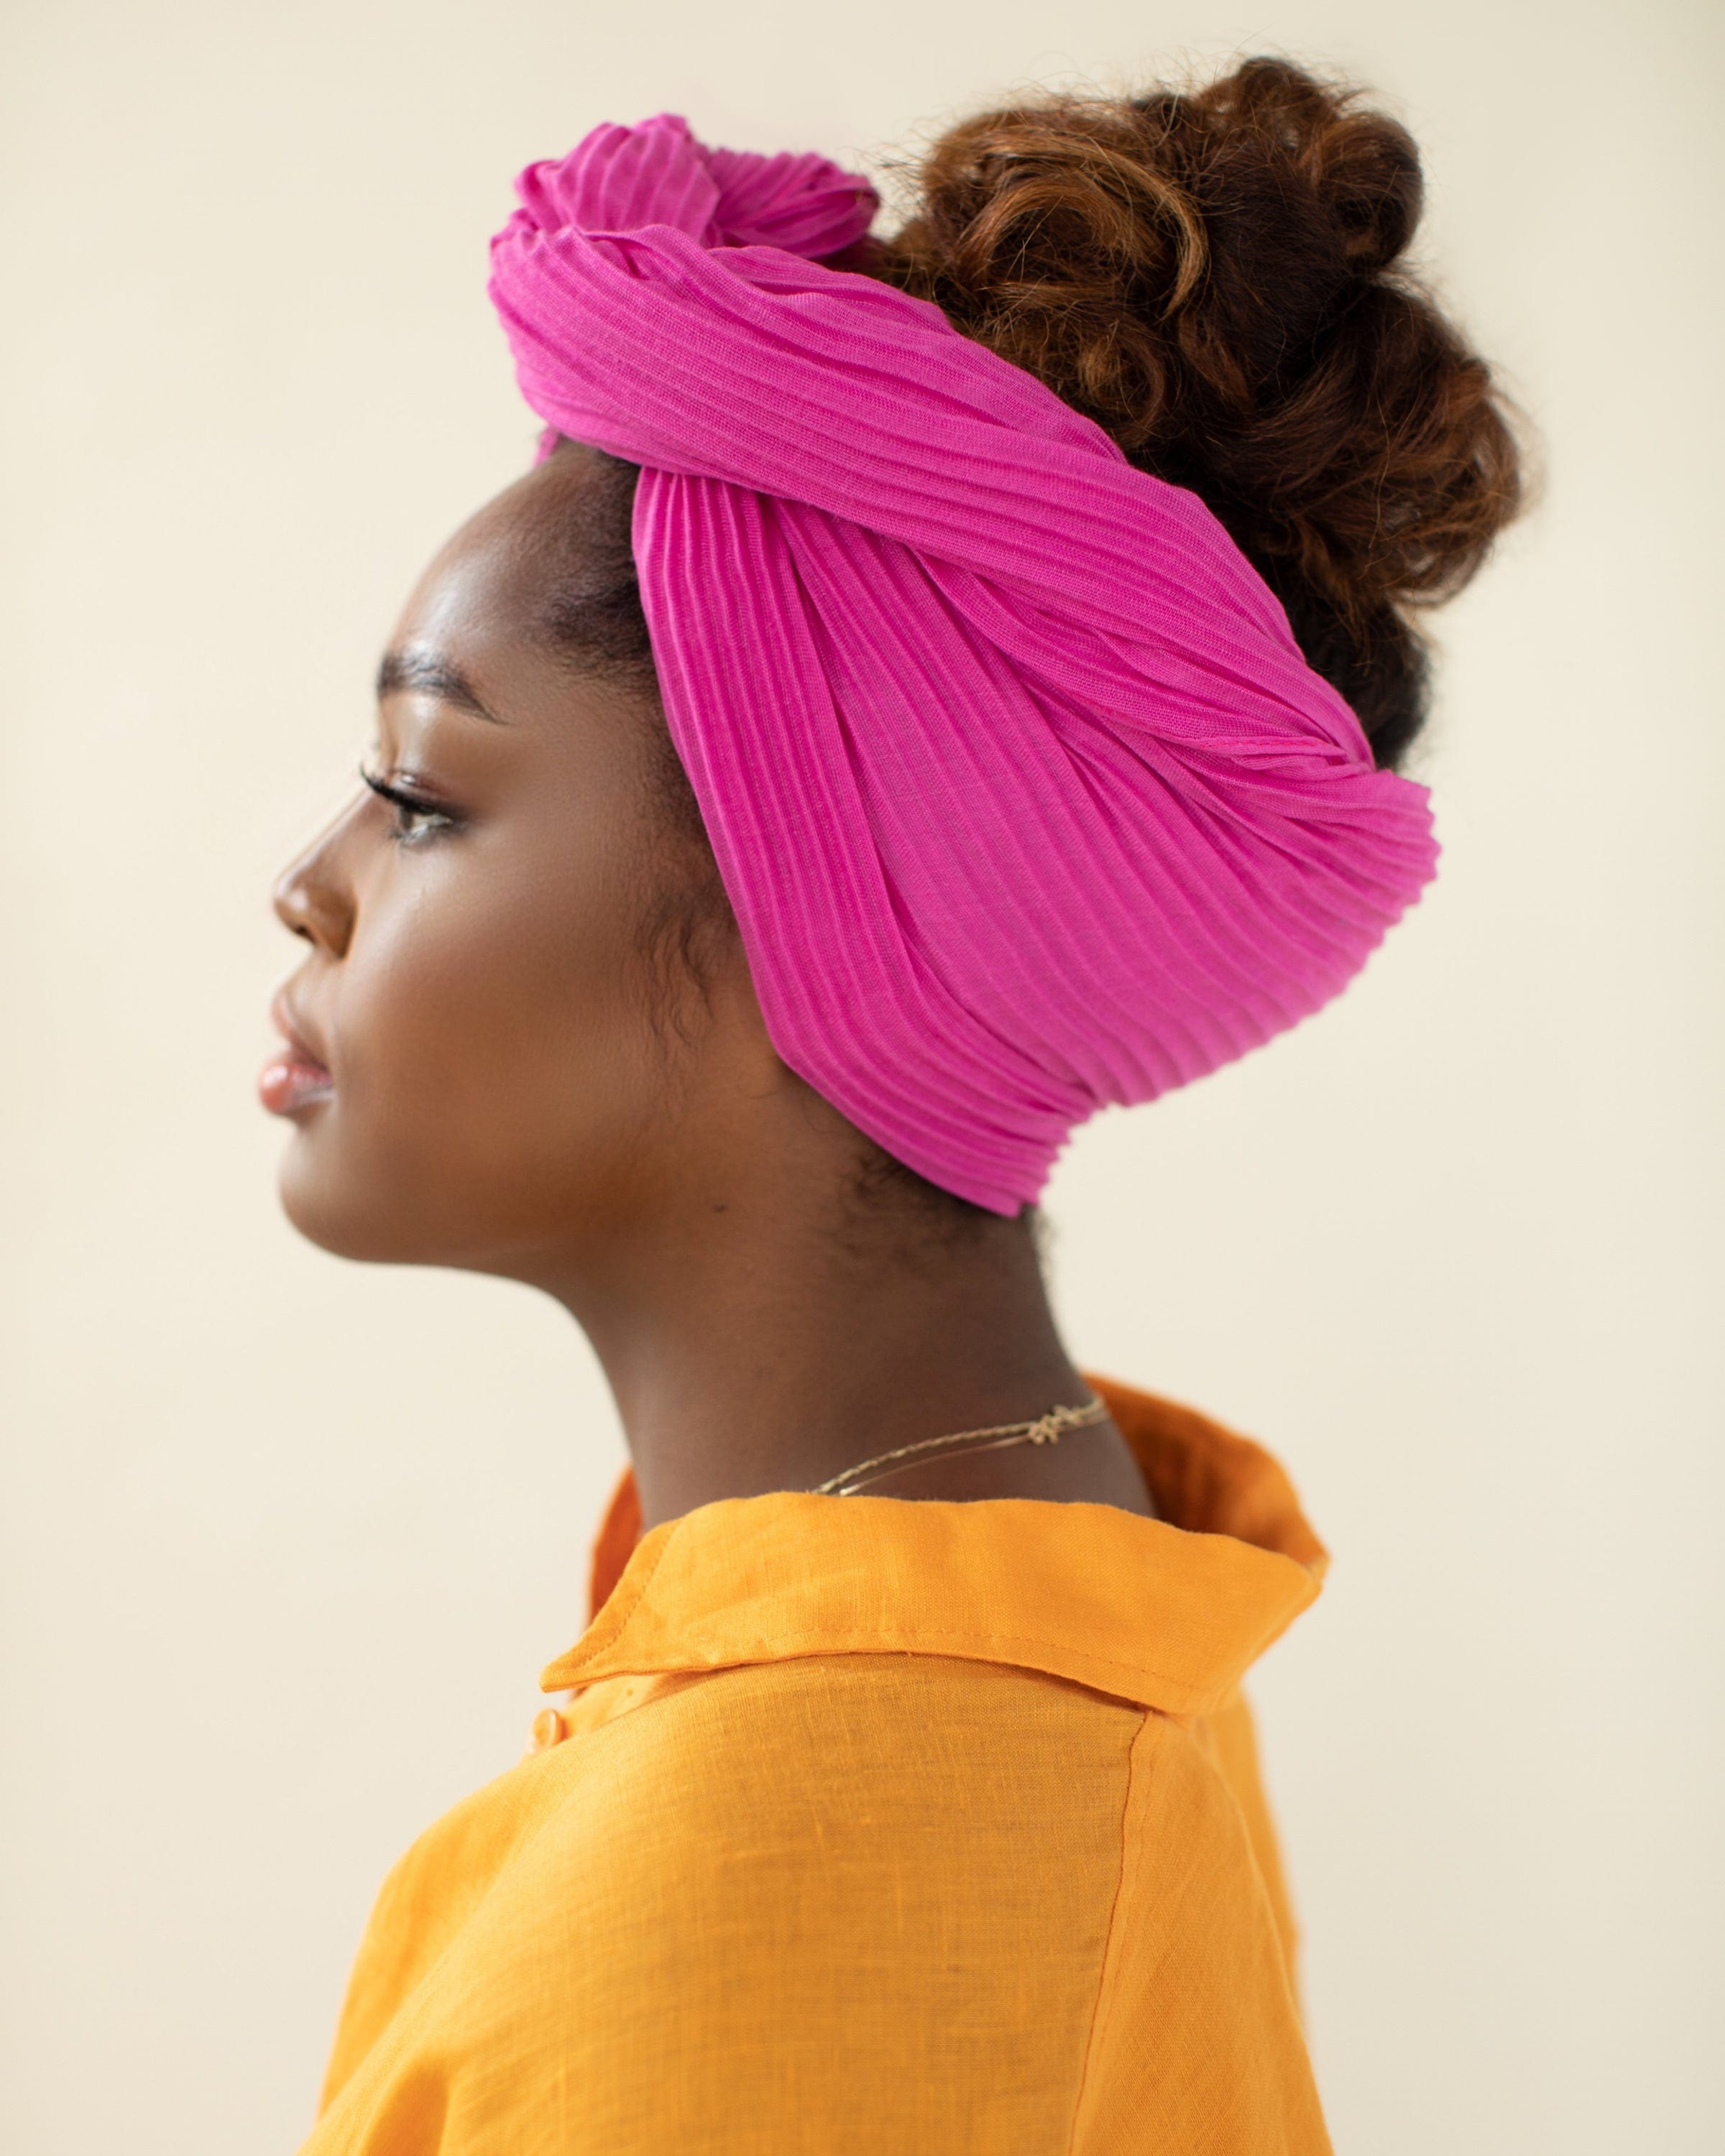 The Wrap Life Pleated Head Wrap in Rose Violet Pink Head Wrap